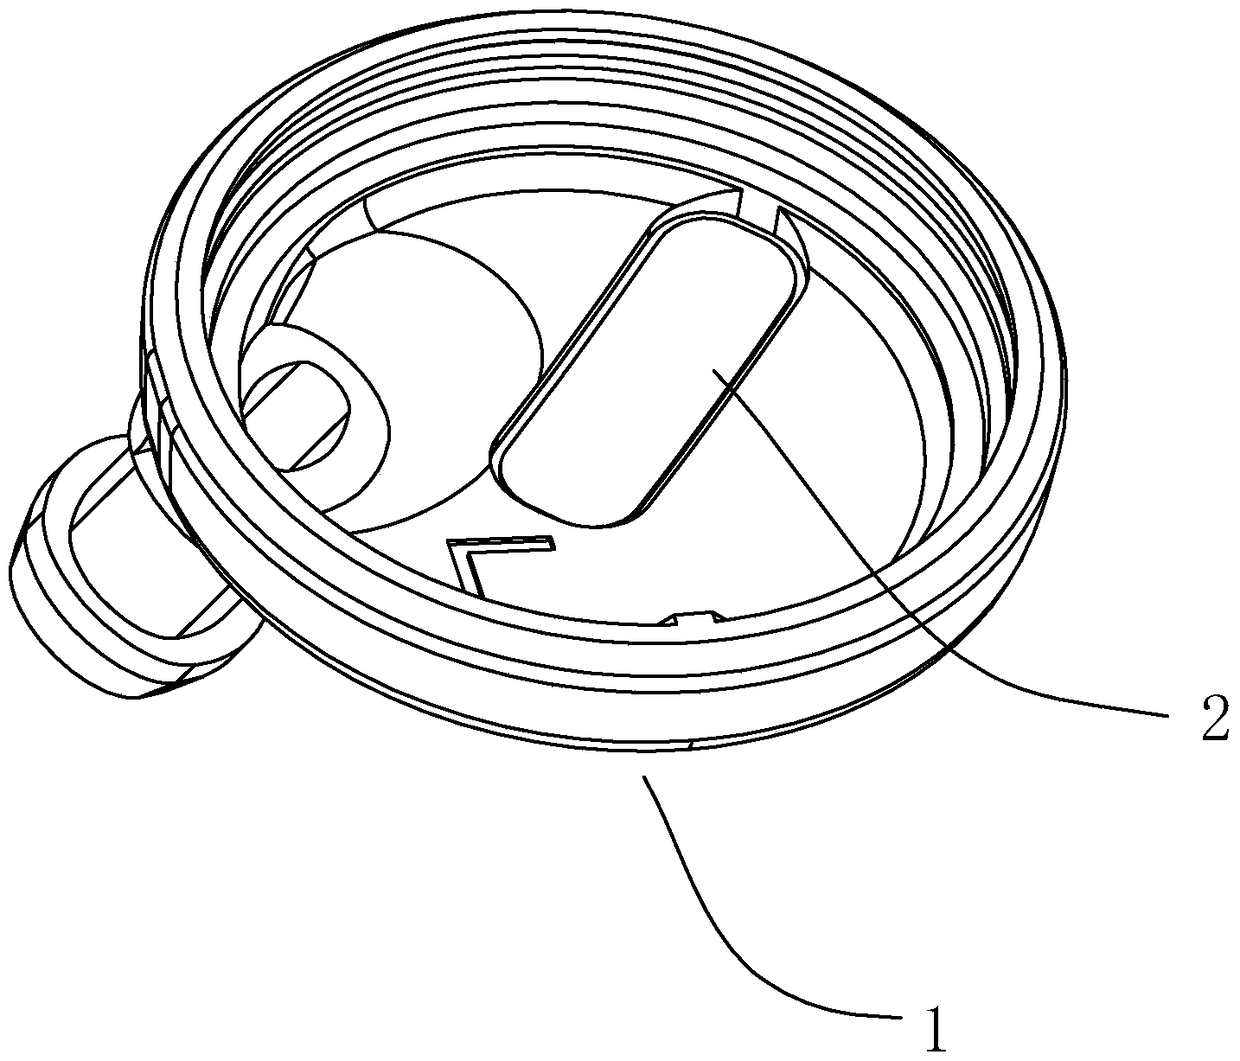 A method for hot-pressing and fixing dust-proof net on earphone cover